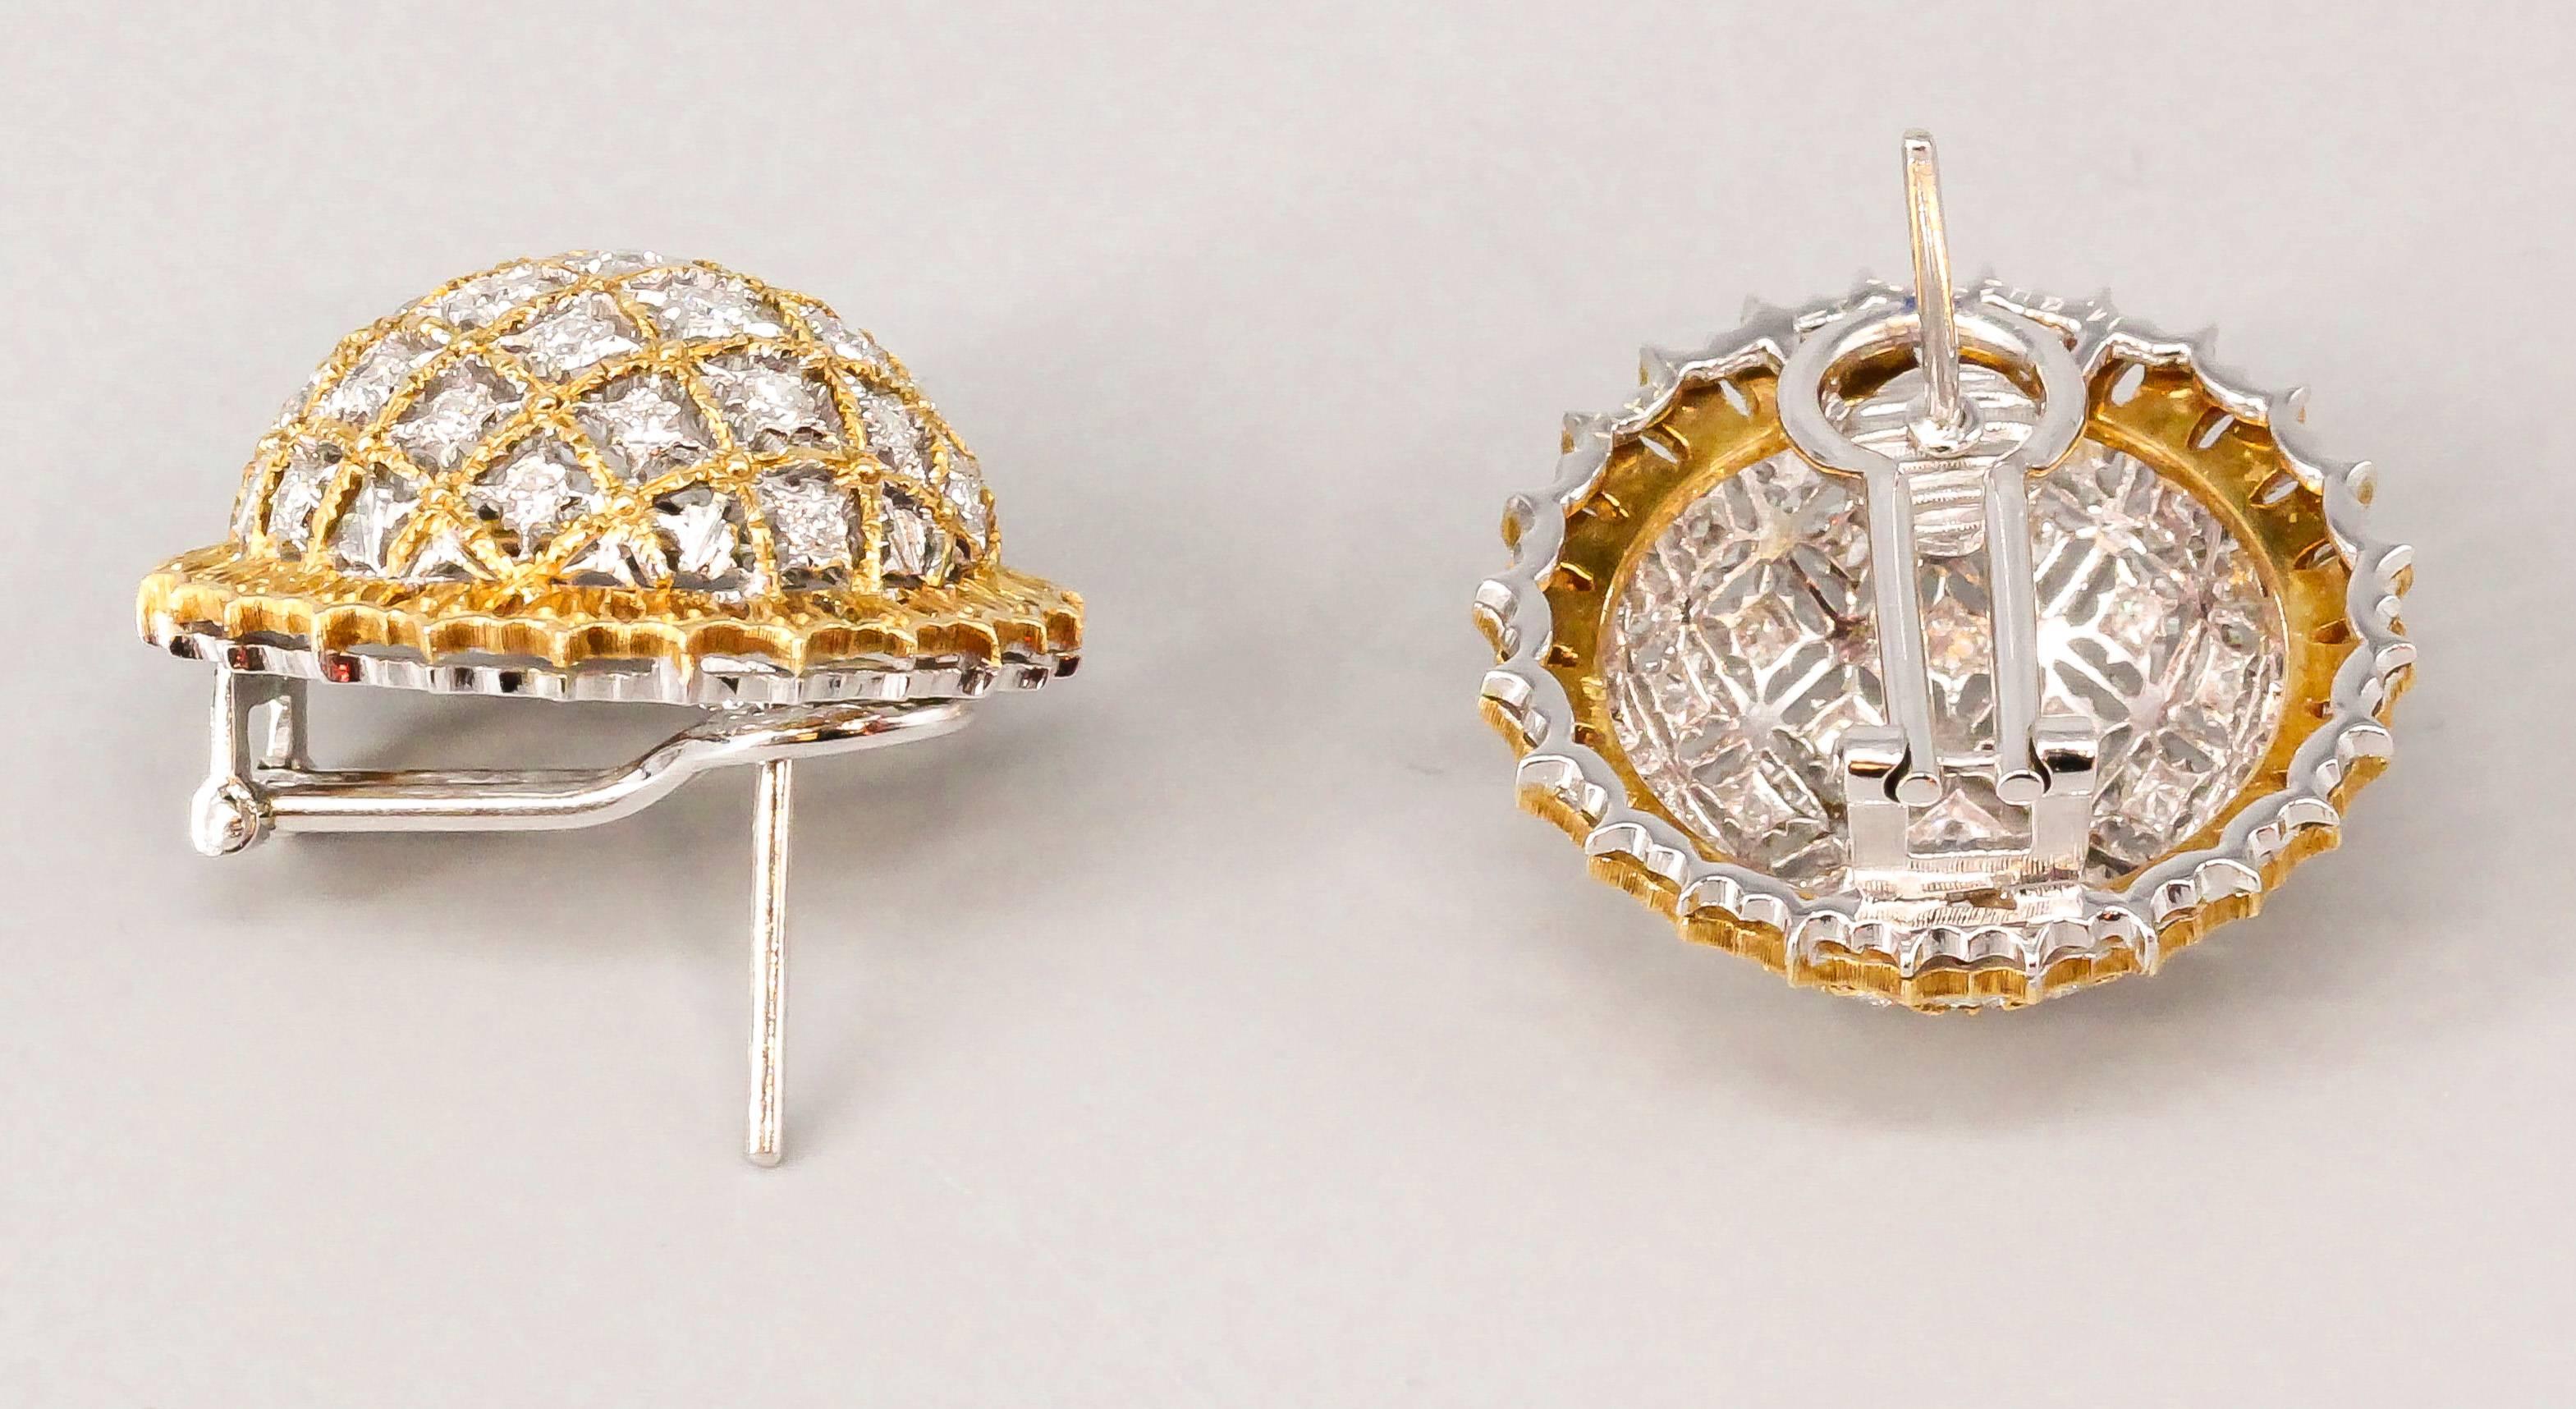 Elegant and intricate large diamond and 18K yellow & white gold dome earrings by M. Buccellati. They feature high grade round brilliant cut diamonds throughout the dome, with intricate yellow gold around the edge and white gold as the rest of the